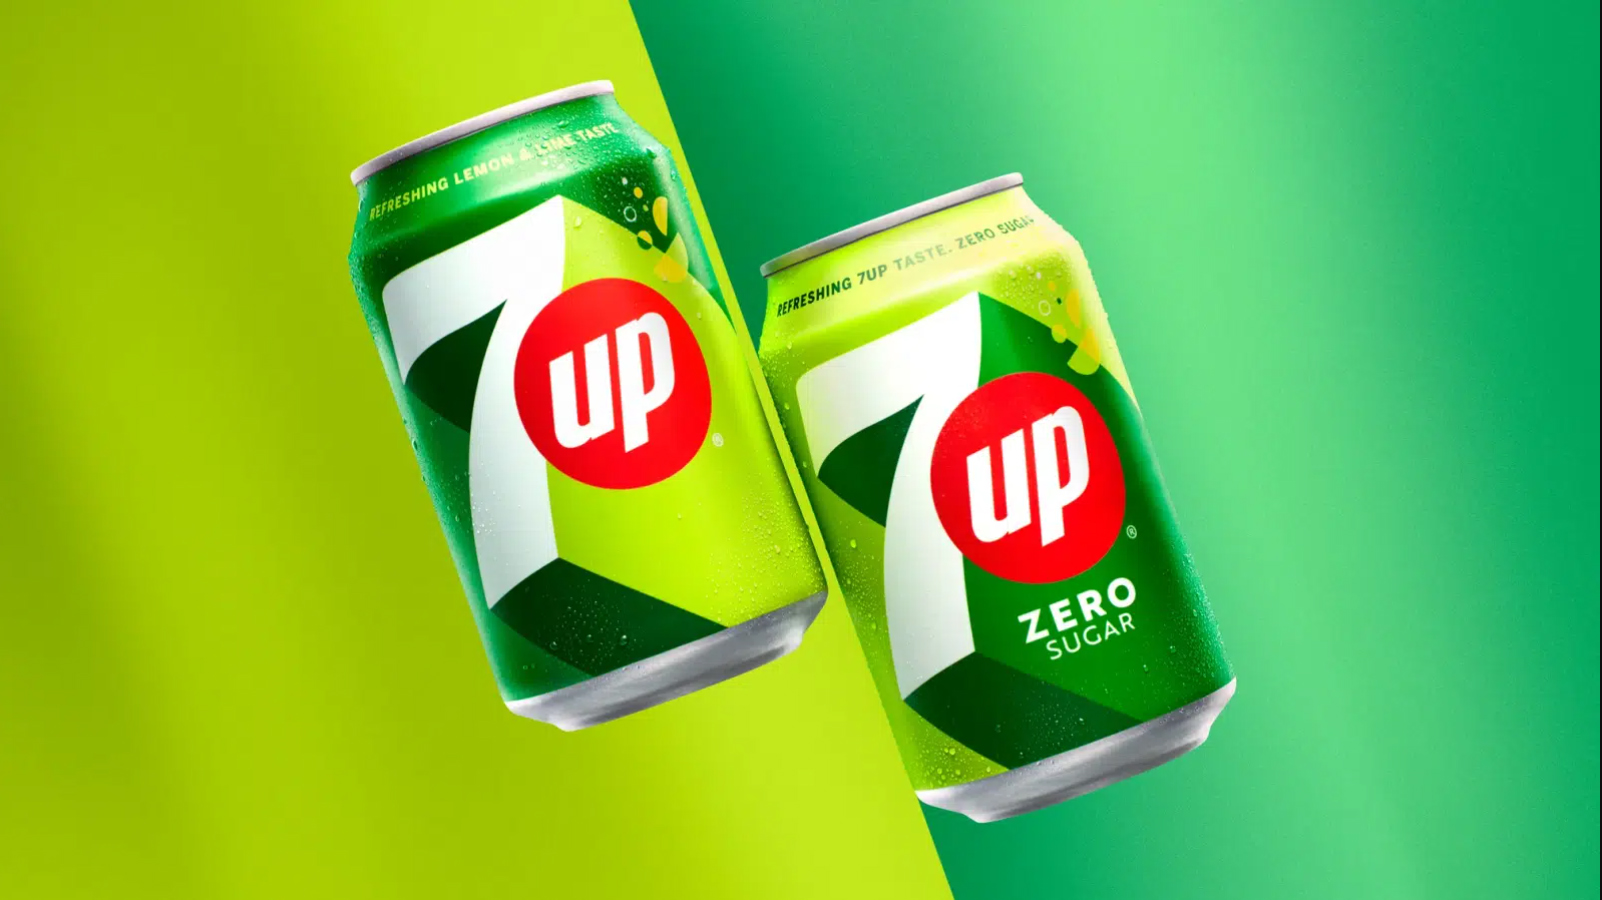 7up17up1